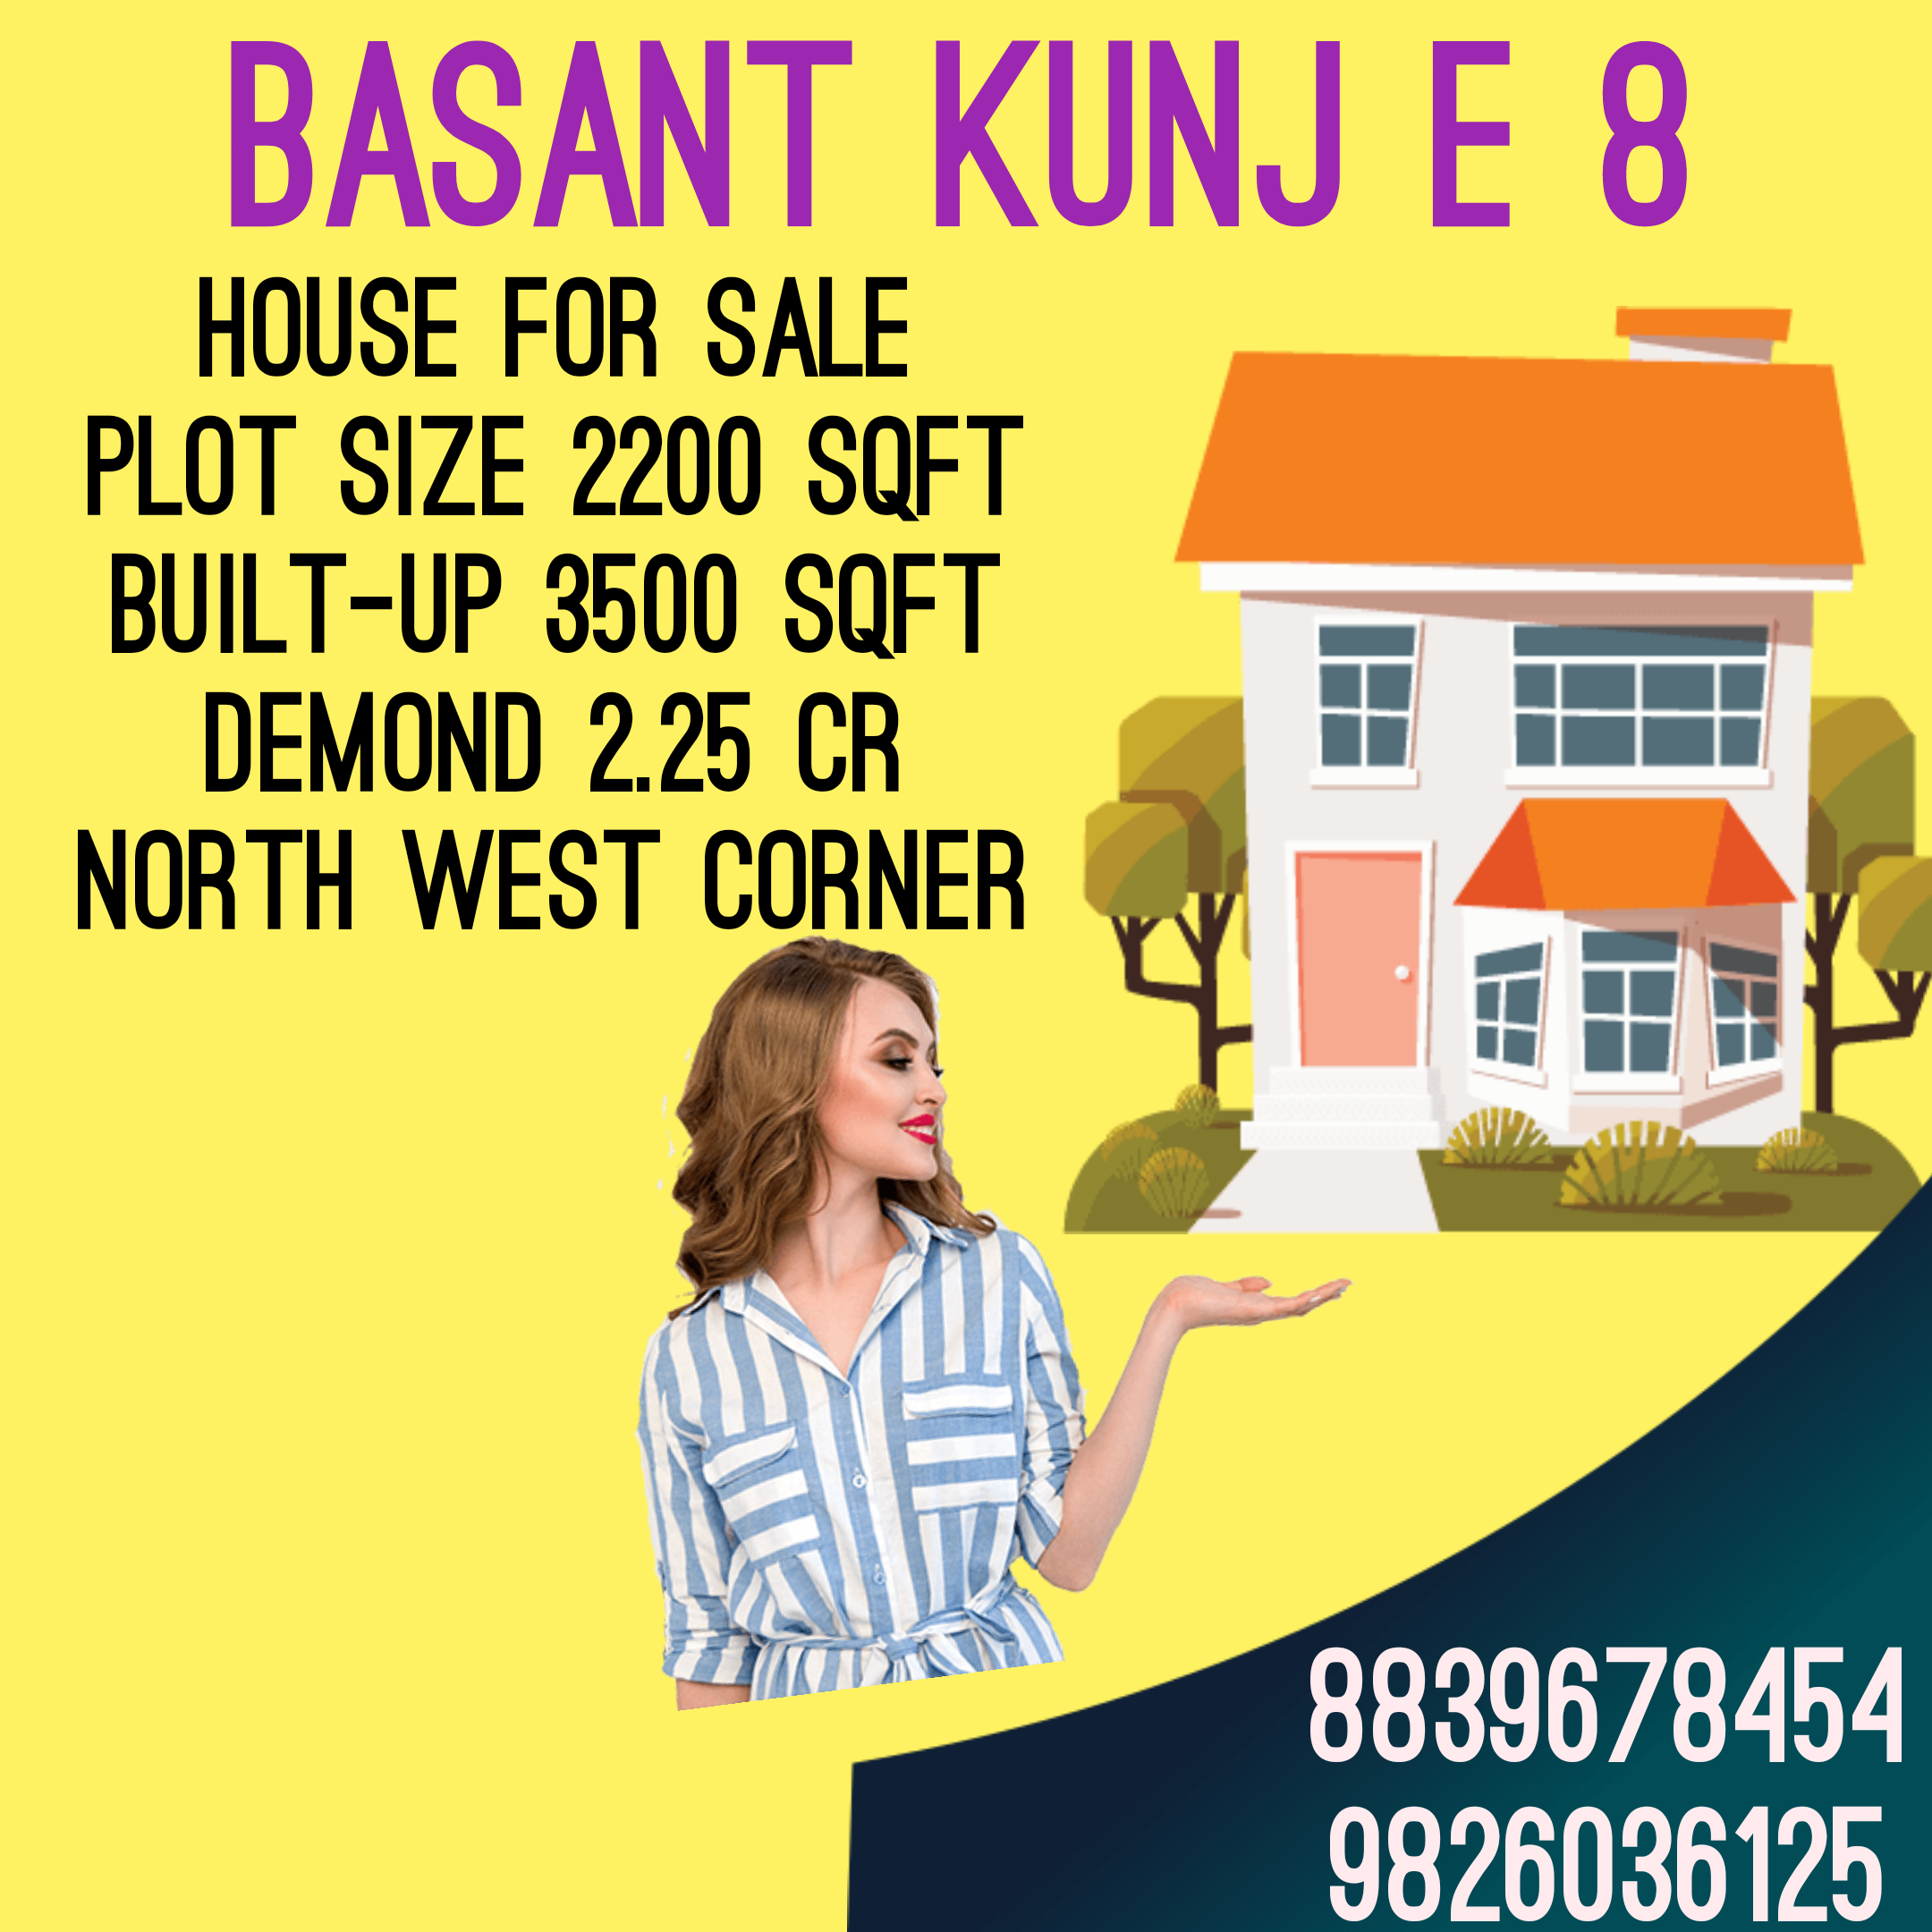 4 BHK Bungalow For sale in E 8 Basant Kunj , Bhopal